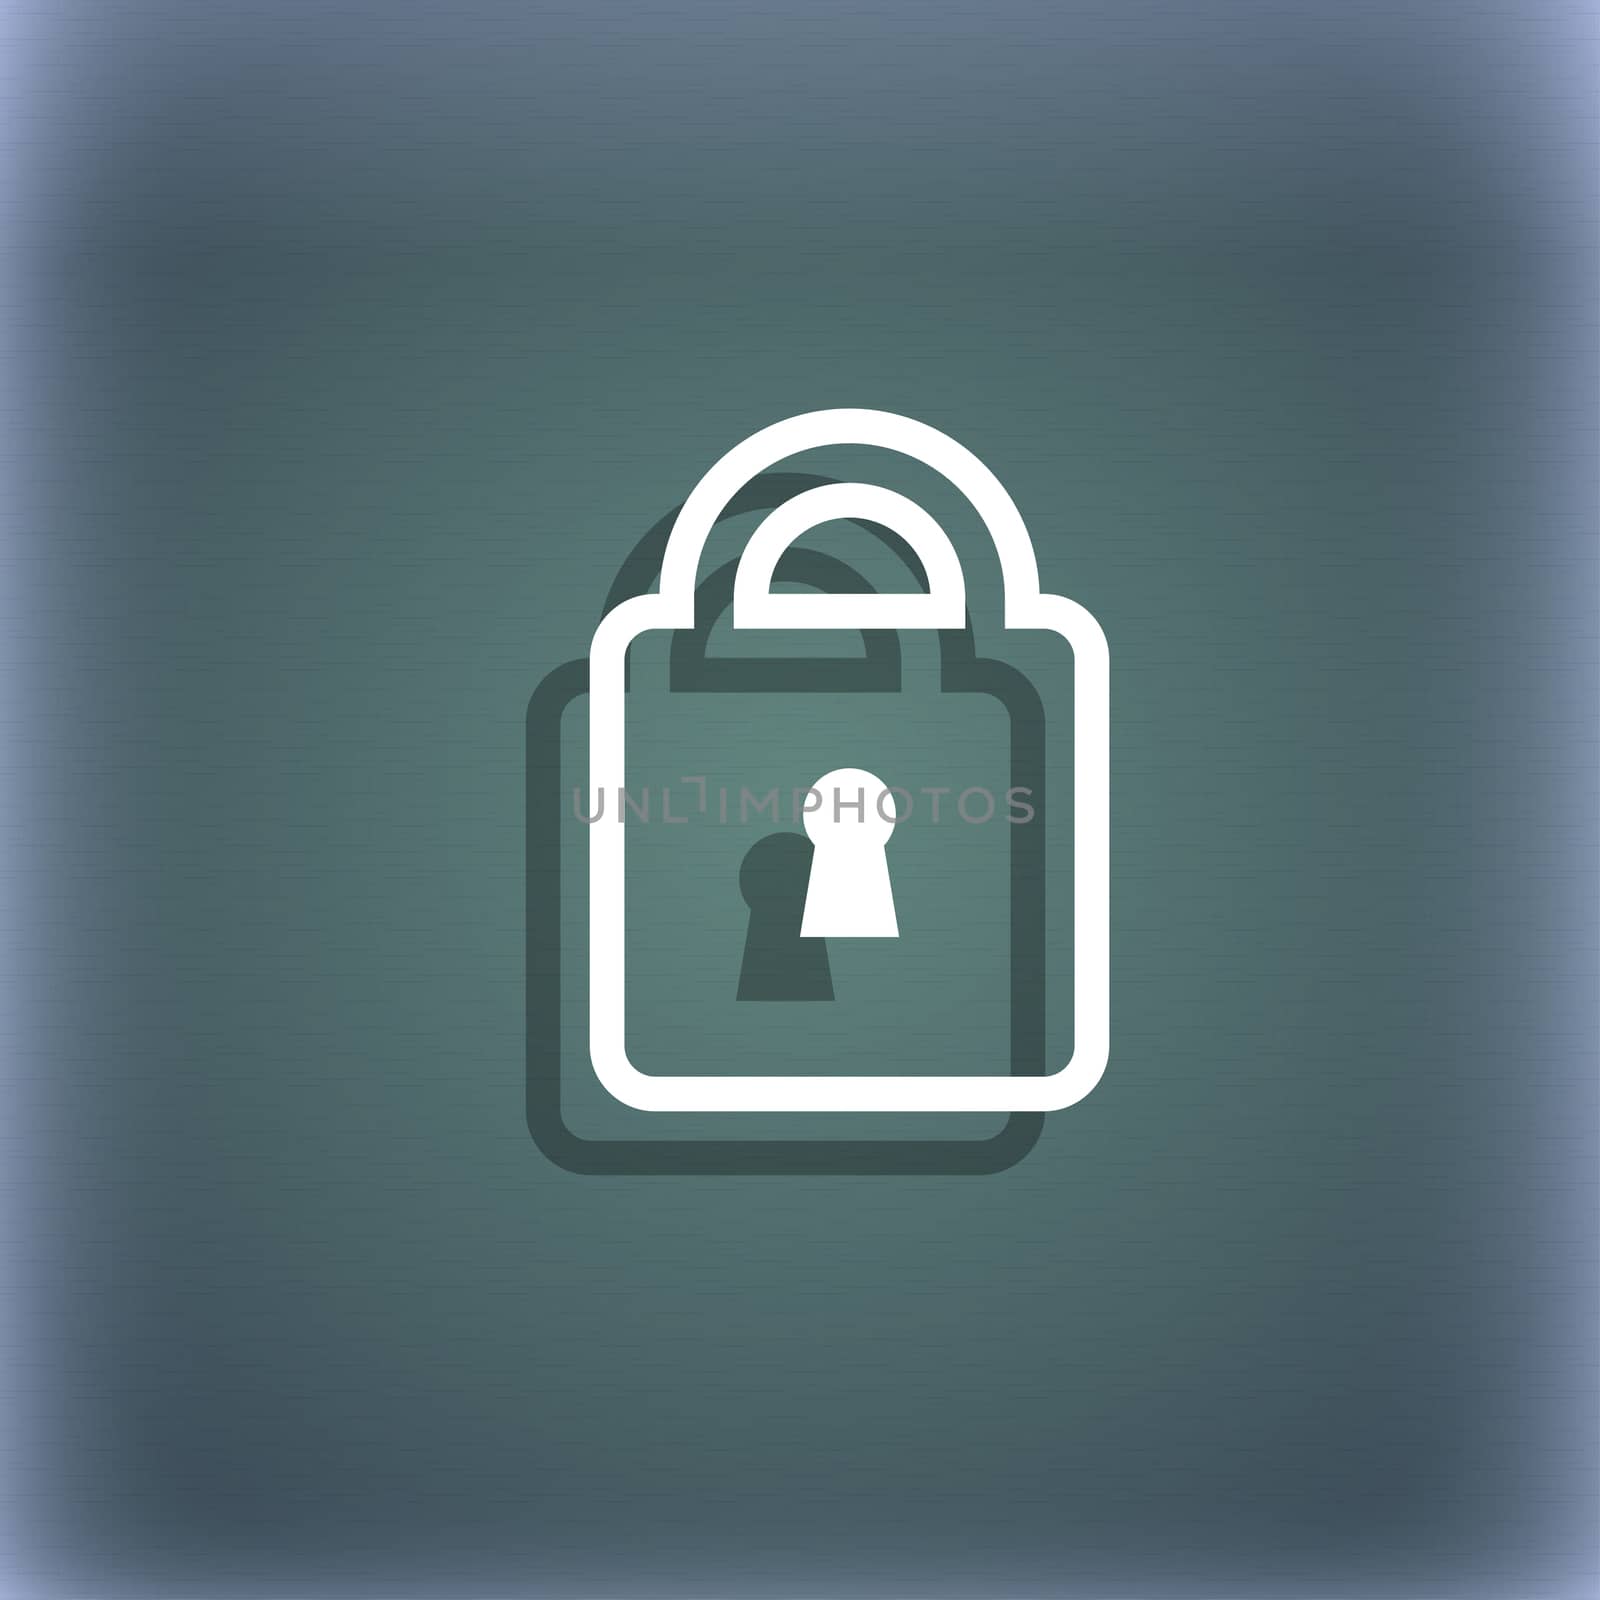 Lock icon symbol on the blue-green abstract background with shadow and space for your text. illustration